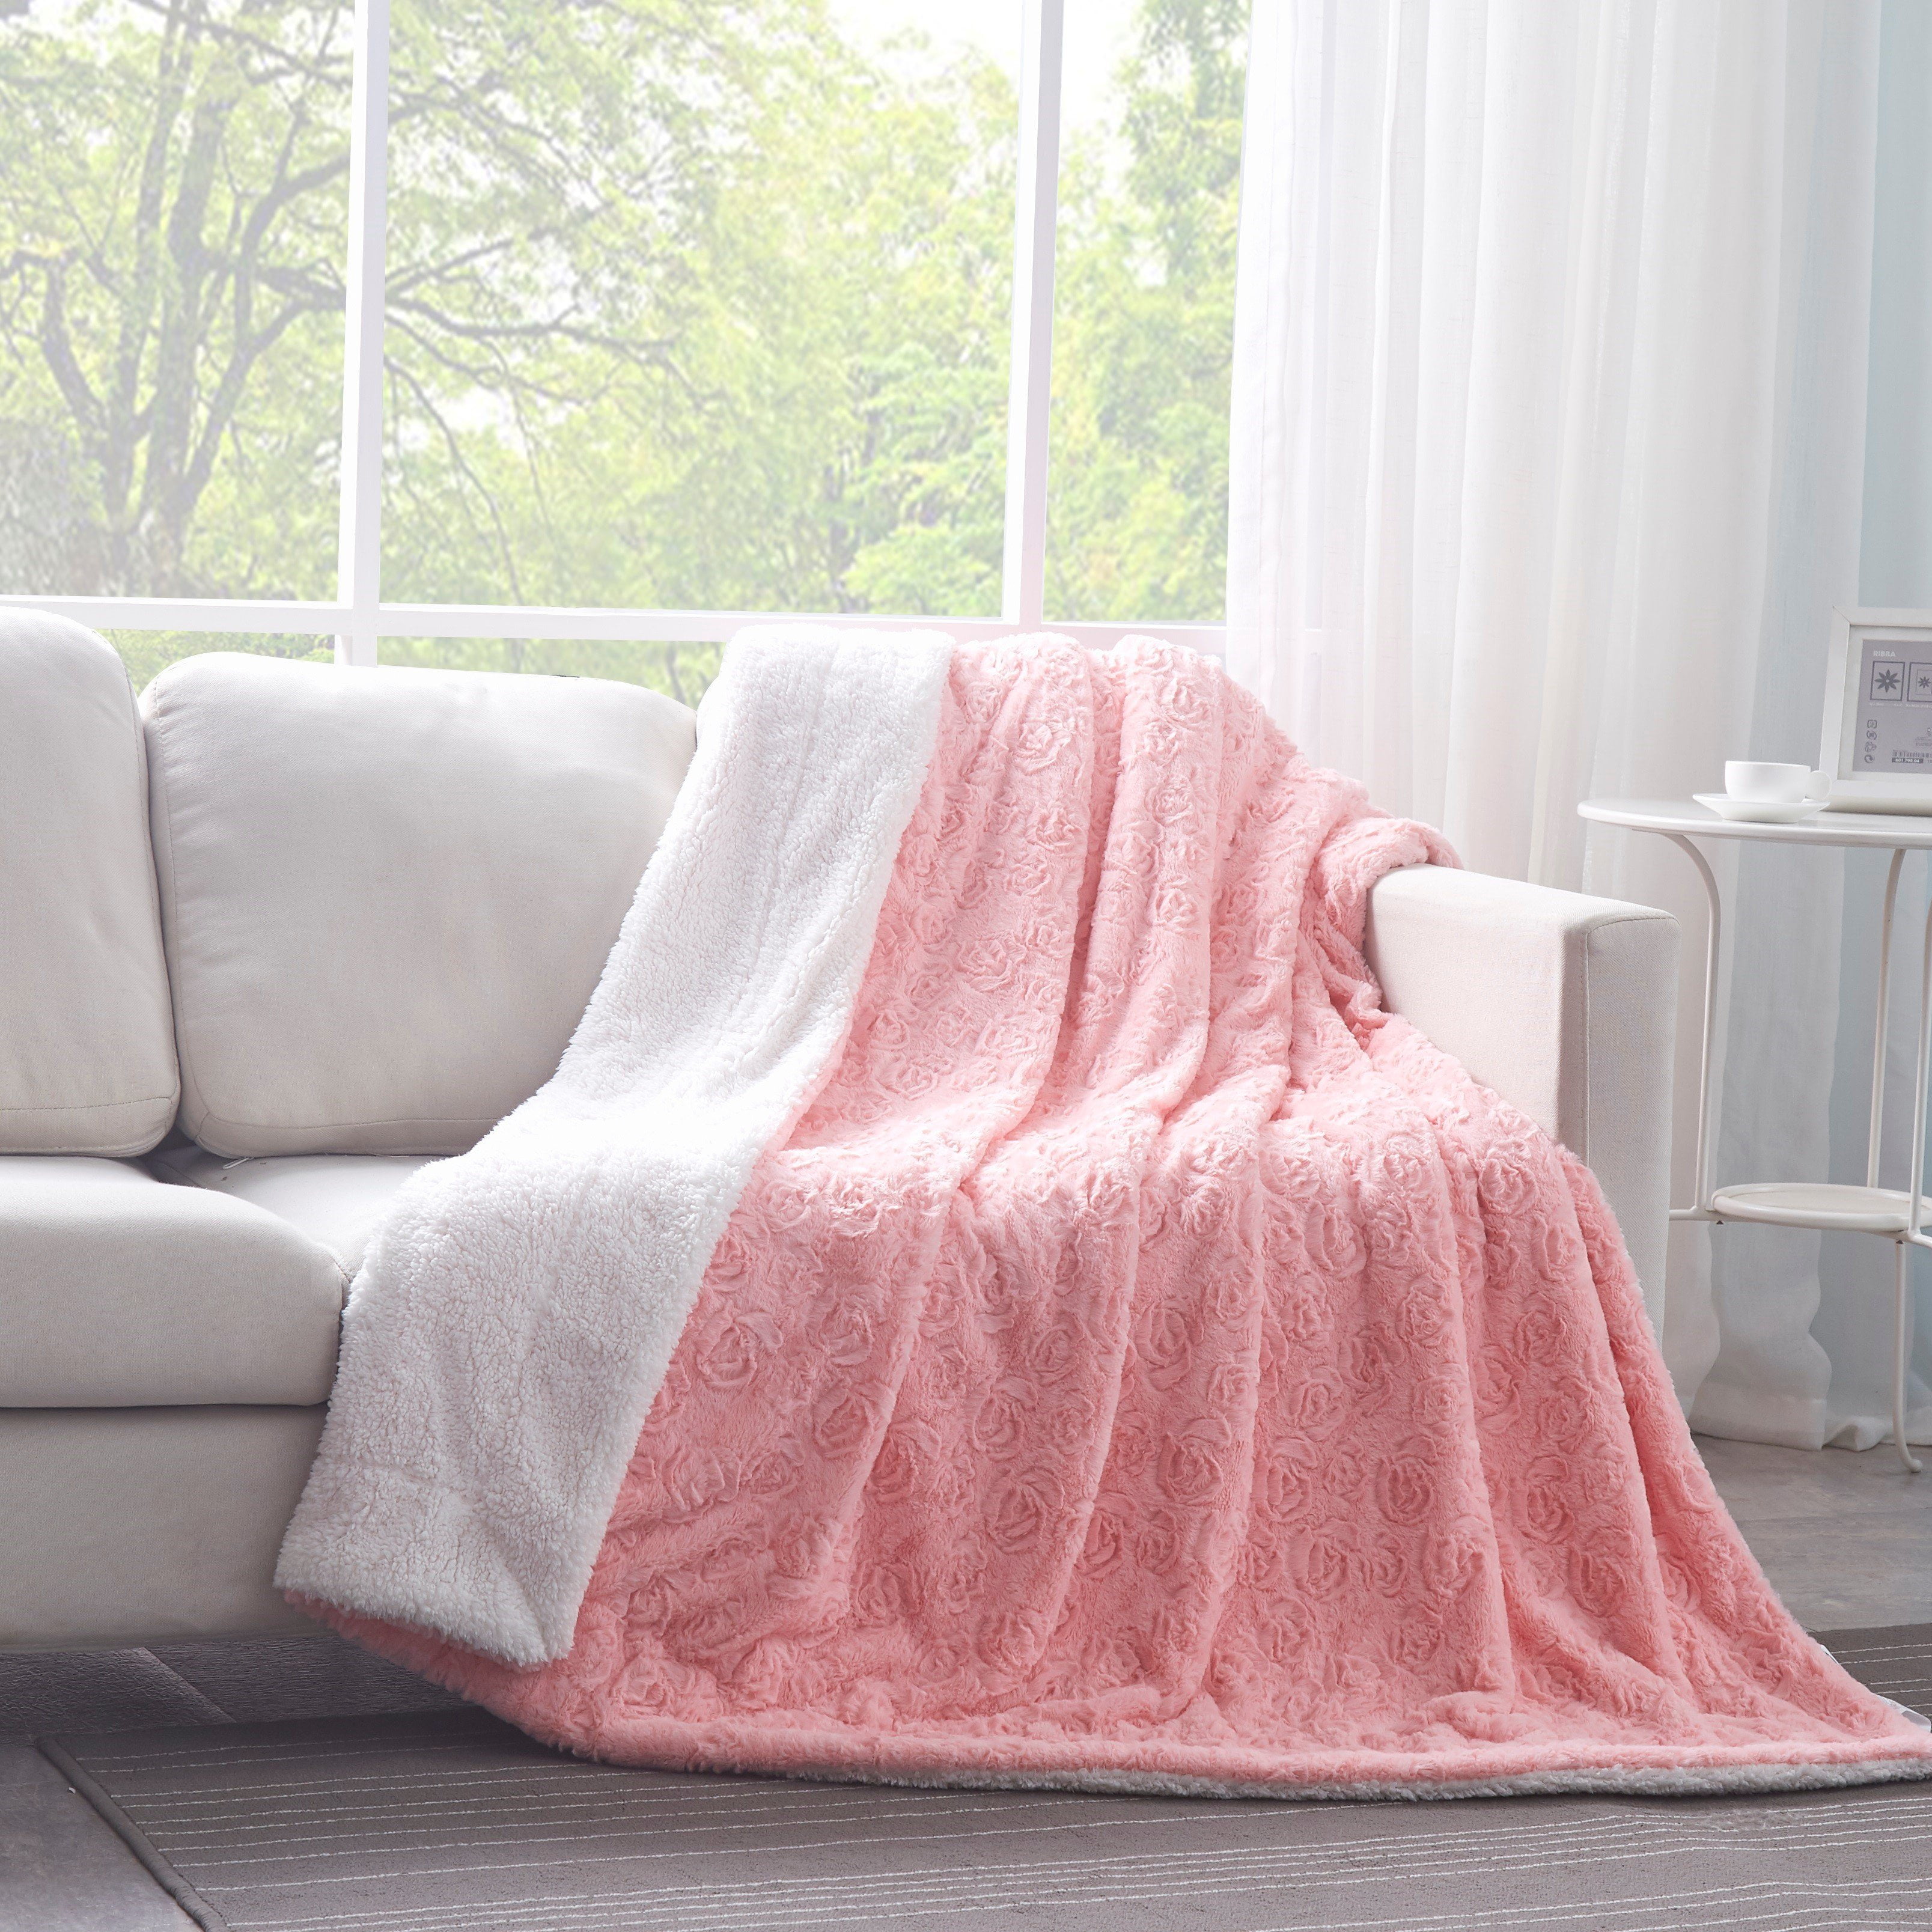 Blooming Roses Super Soft Microfleece Blankets are Used for Home Decoration 